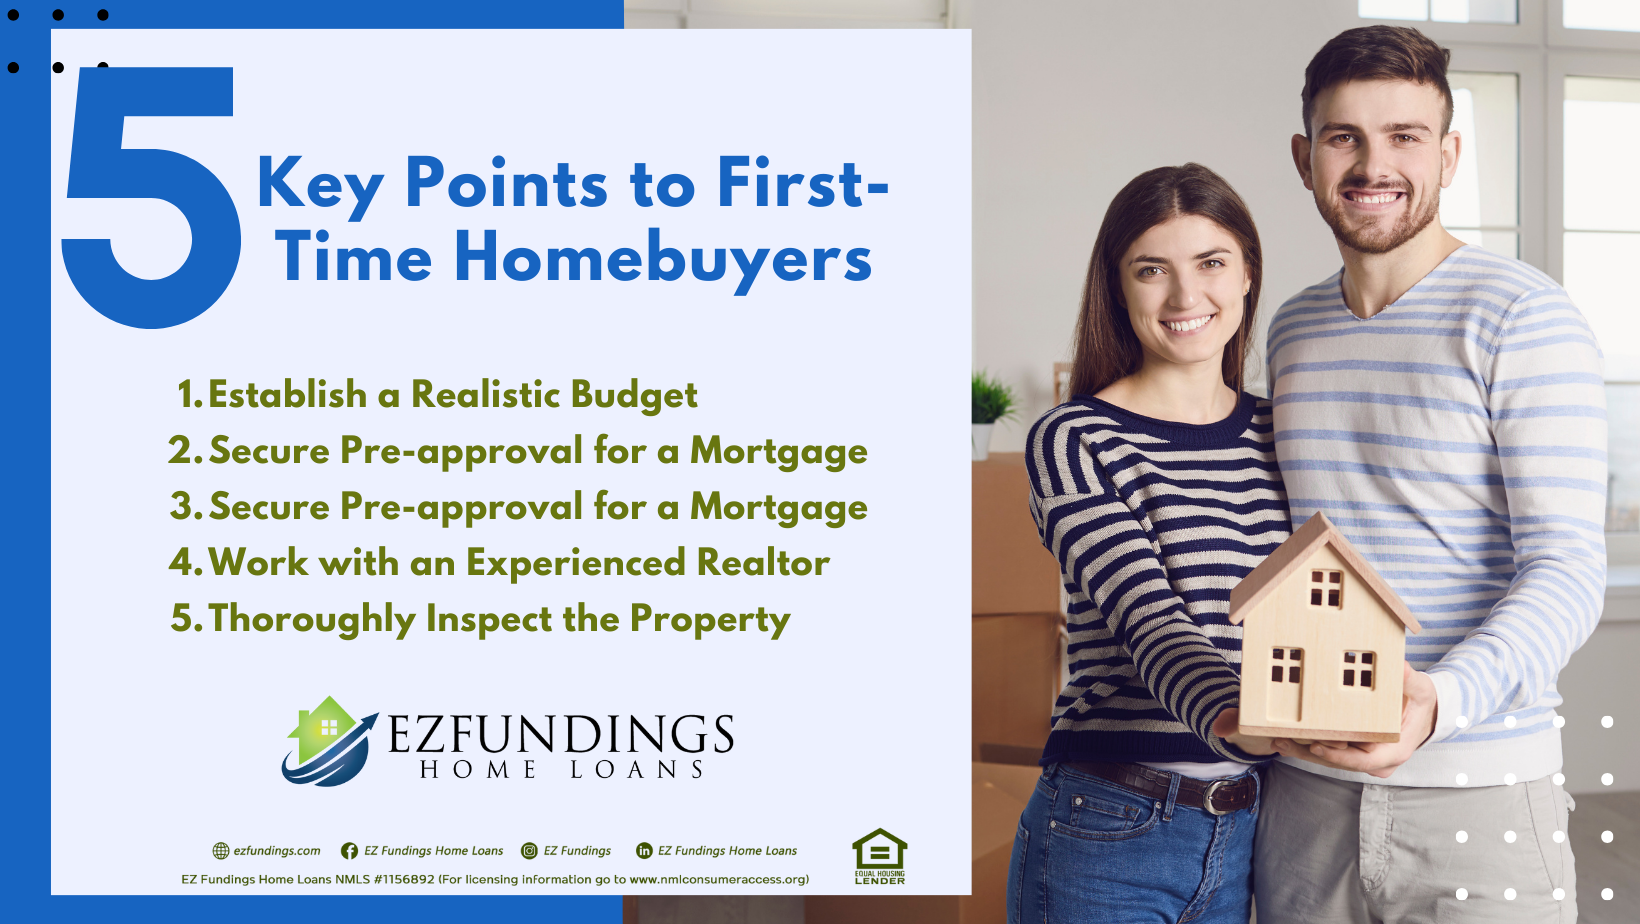 an image shows the five (5) key points to first-time homebuyers